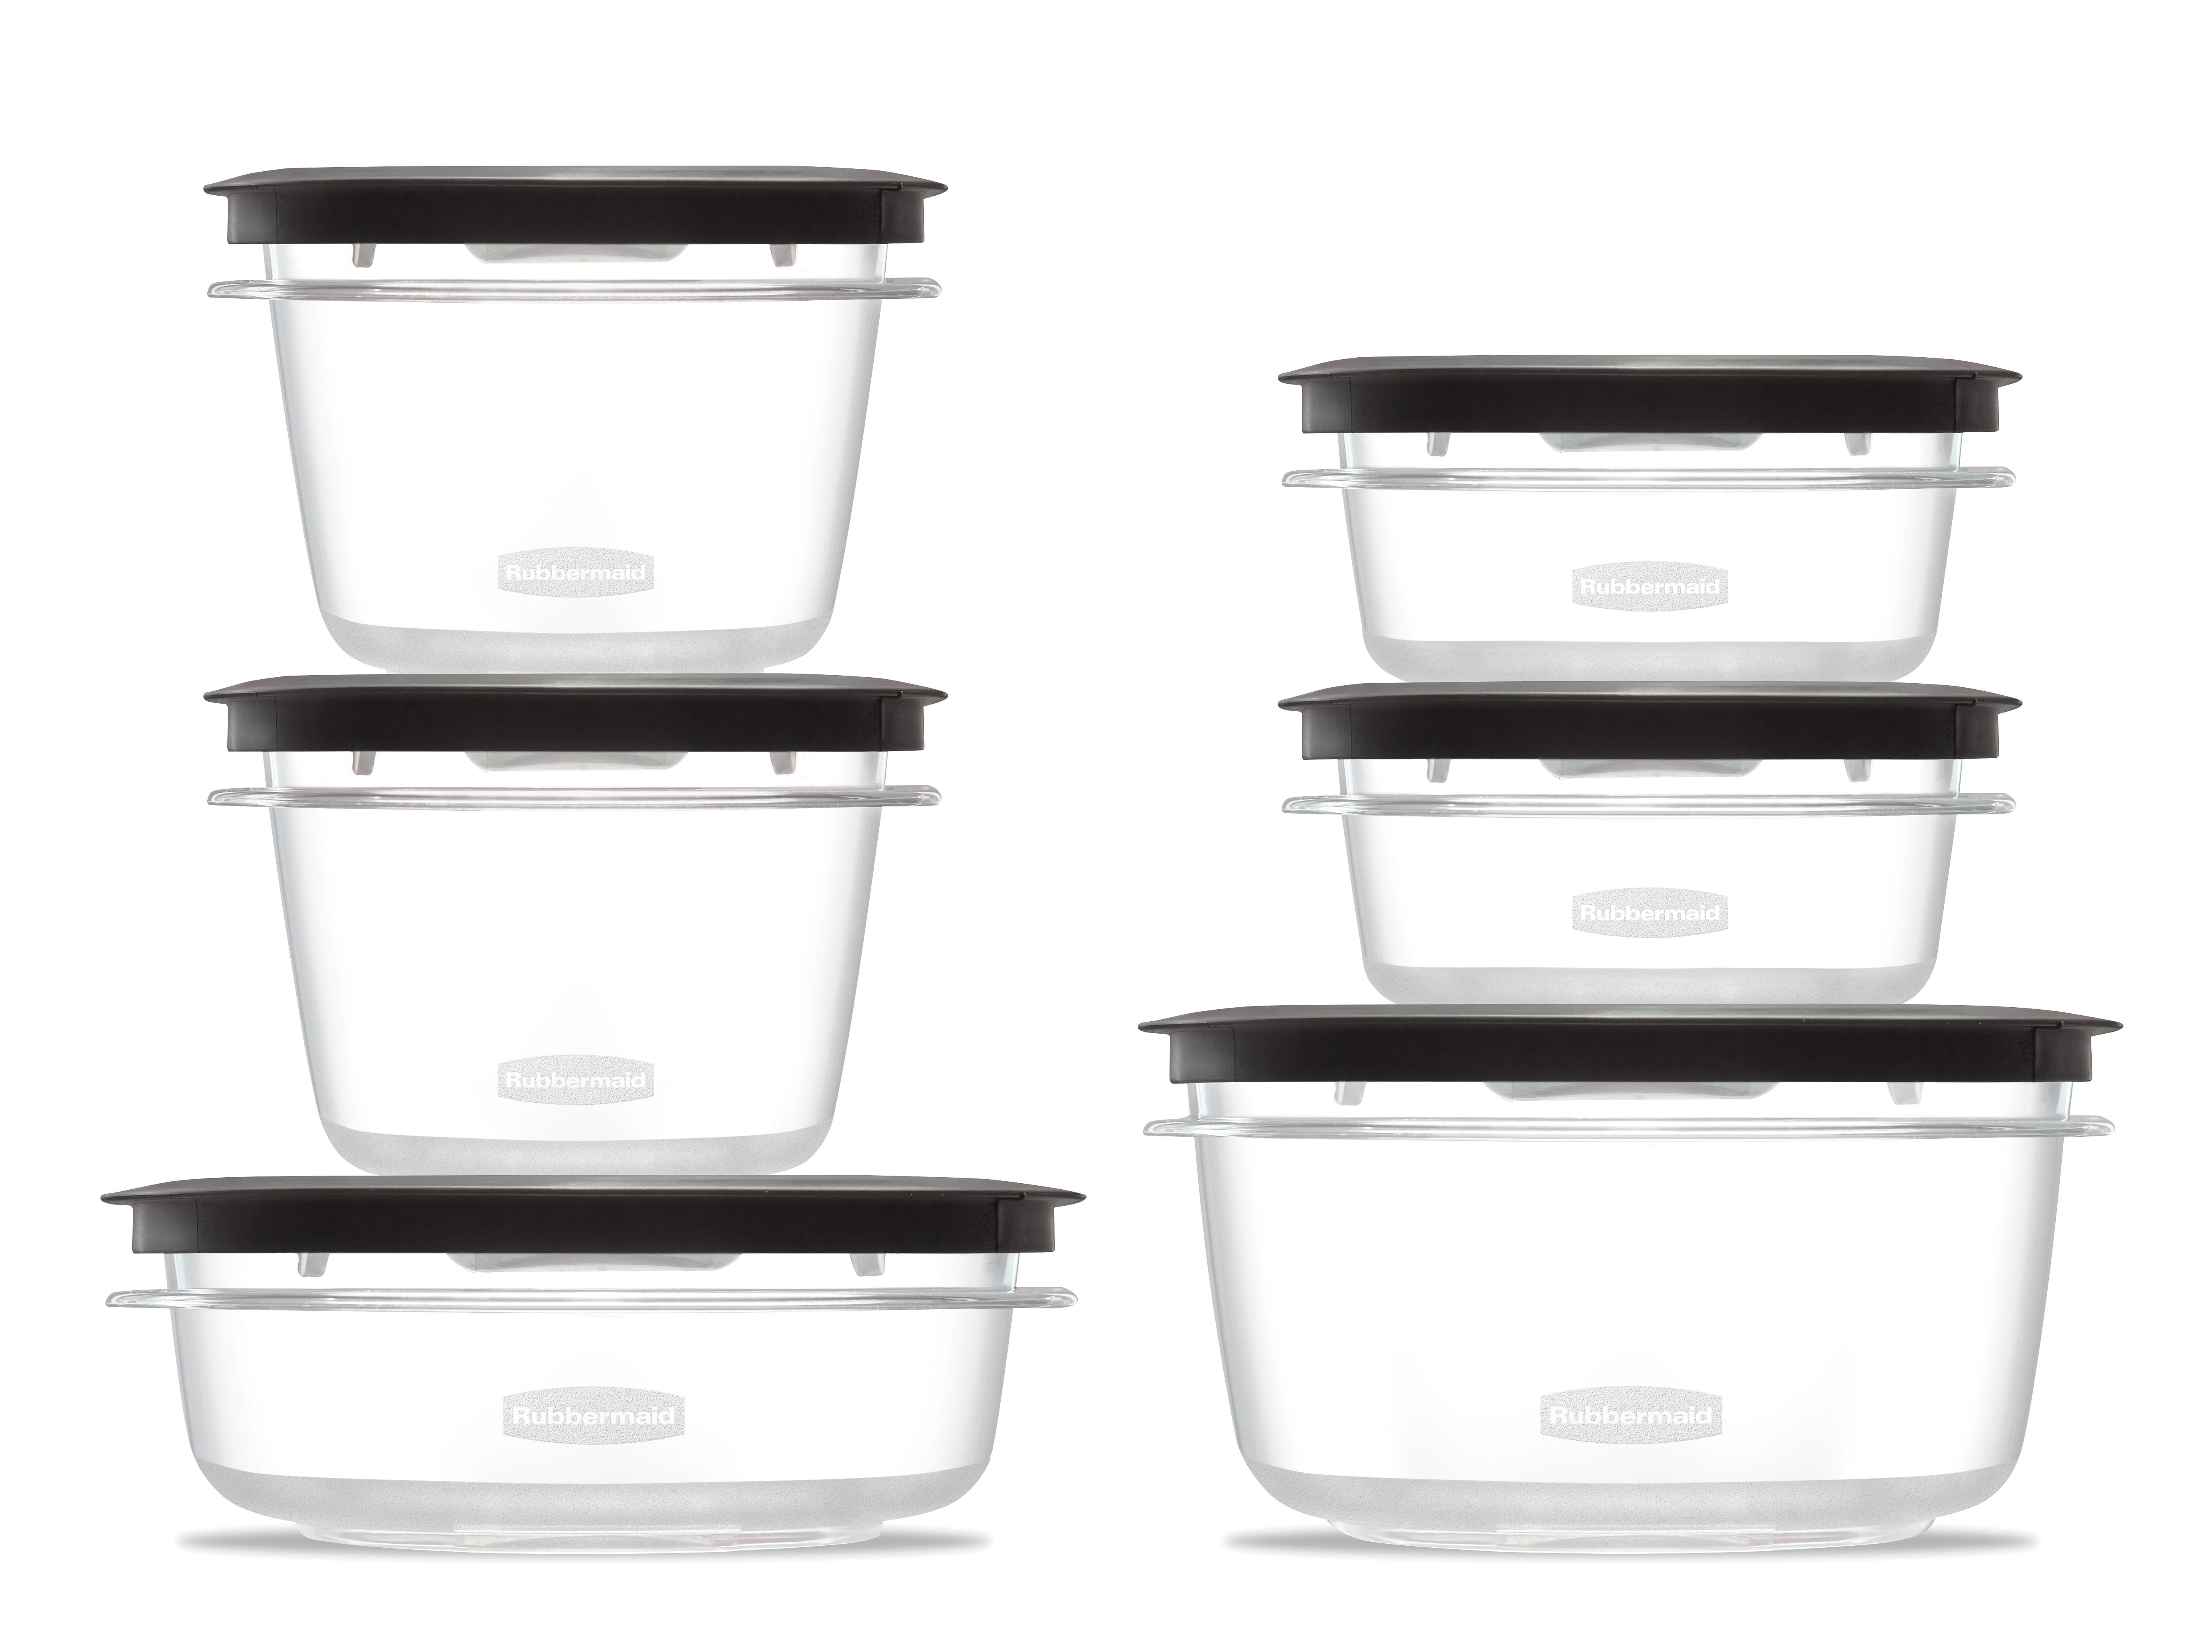 Rubbermaid Premier Easy Find Lids Meal Prep and Food Storage Containers,  Set of 10 (20 Pieces Total), Grey |BPA-Free & Stain Resistant